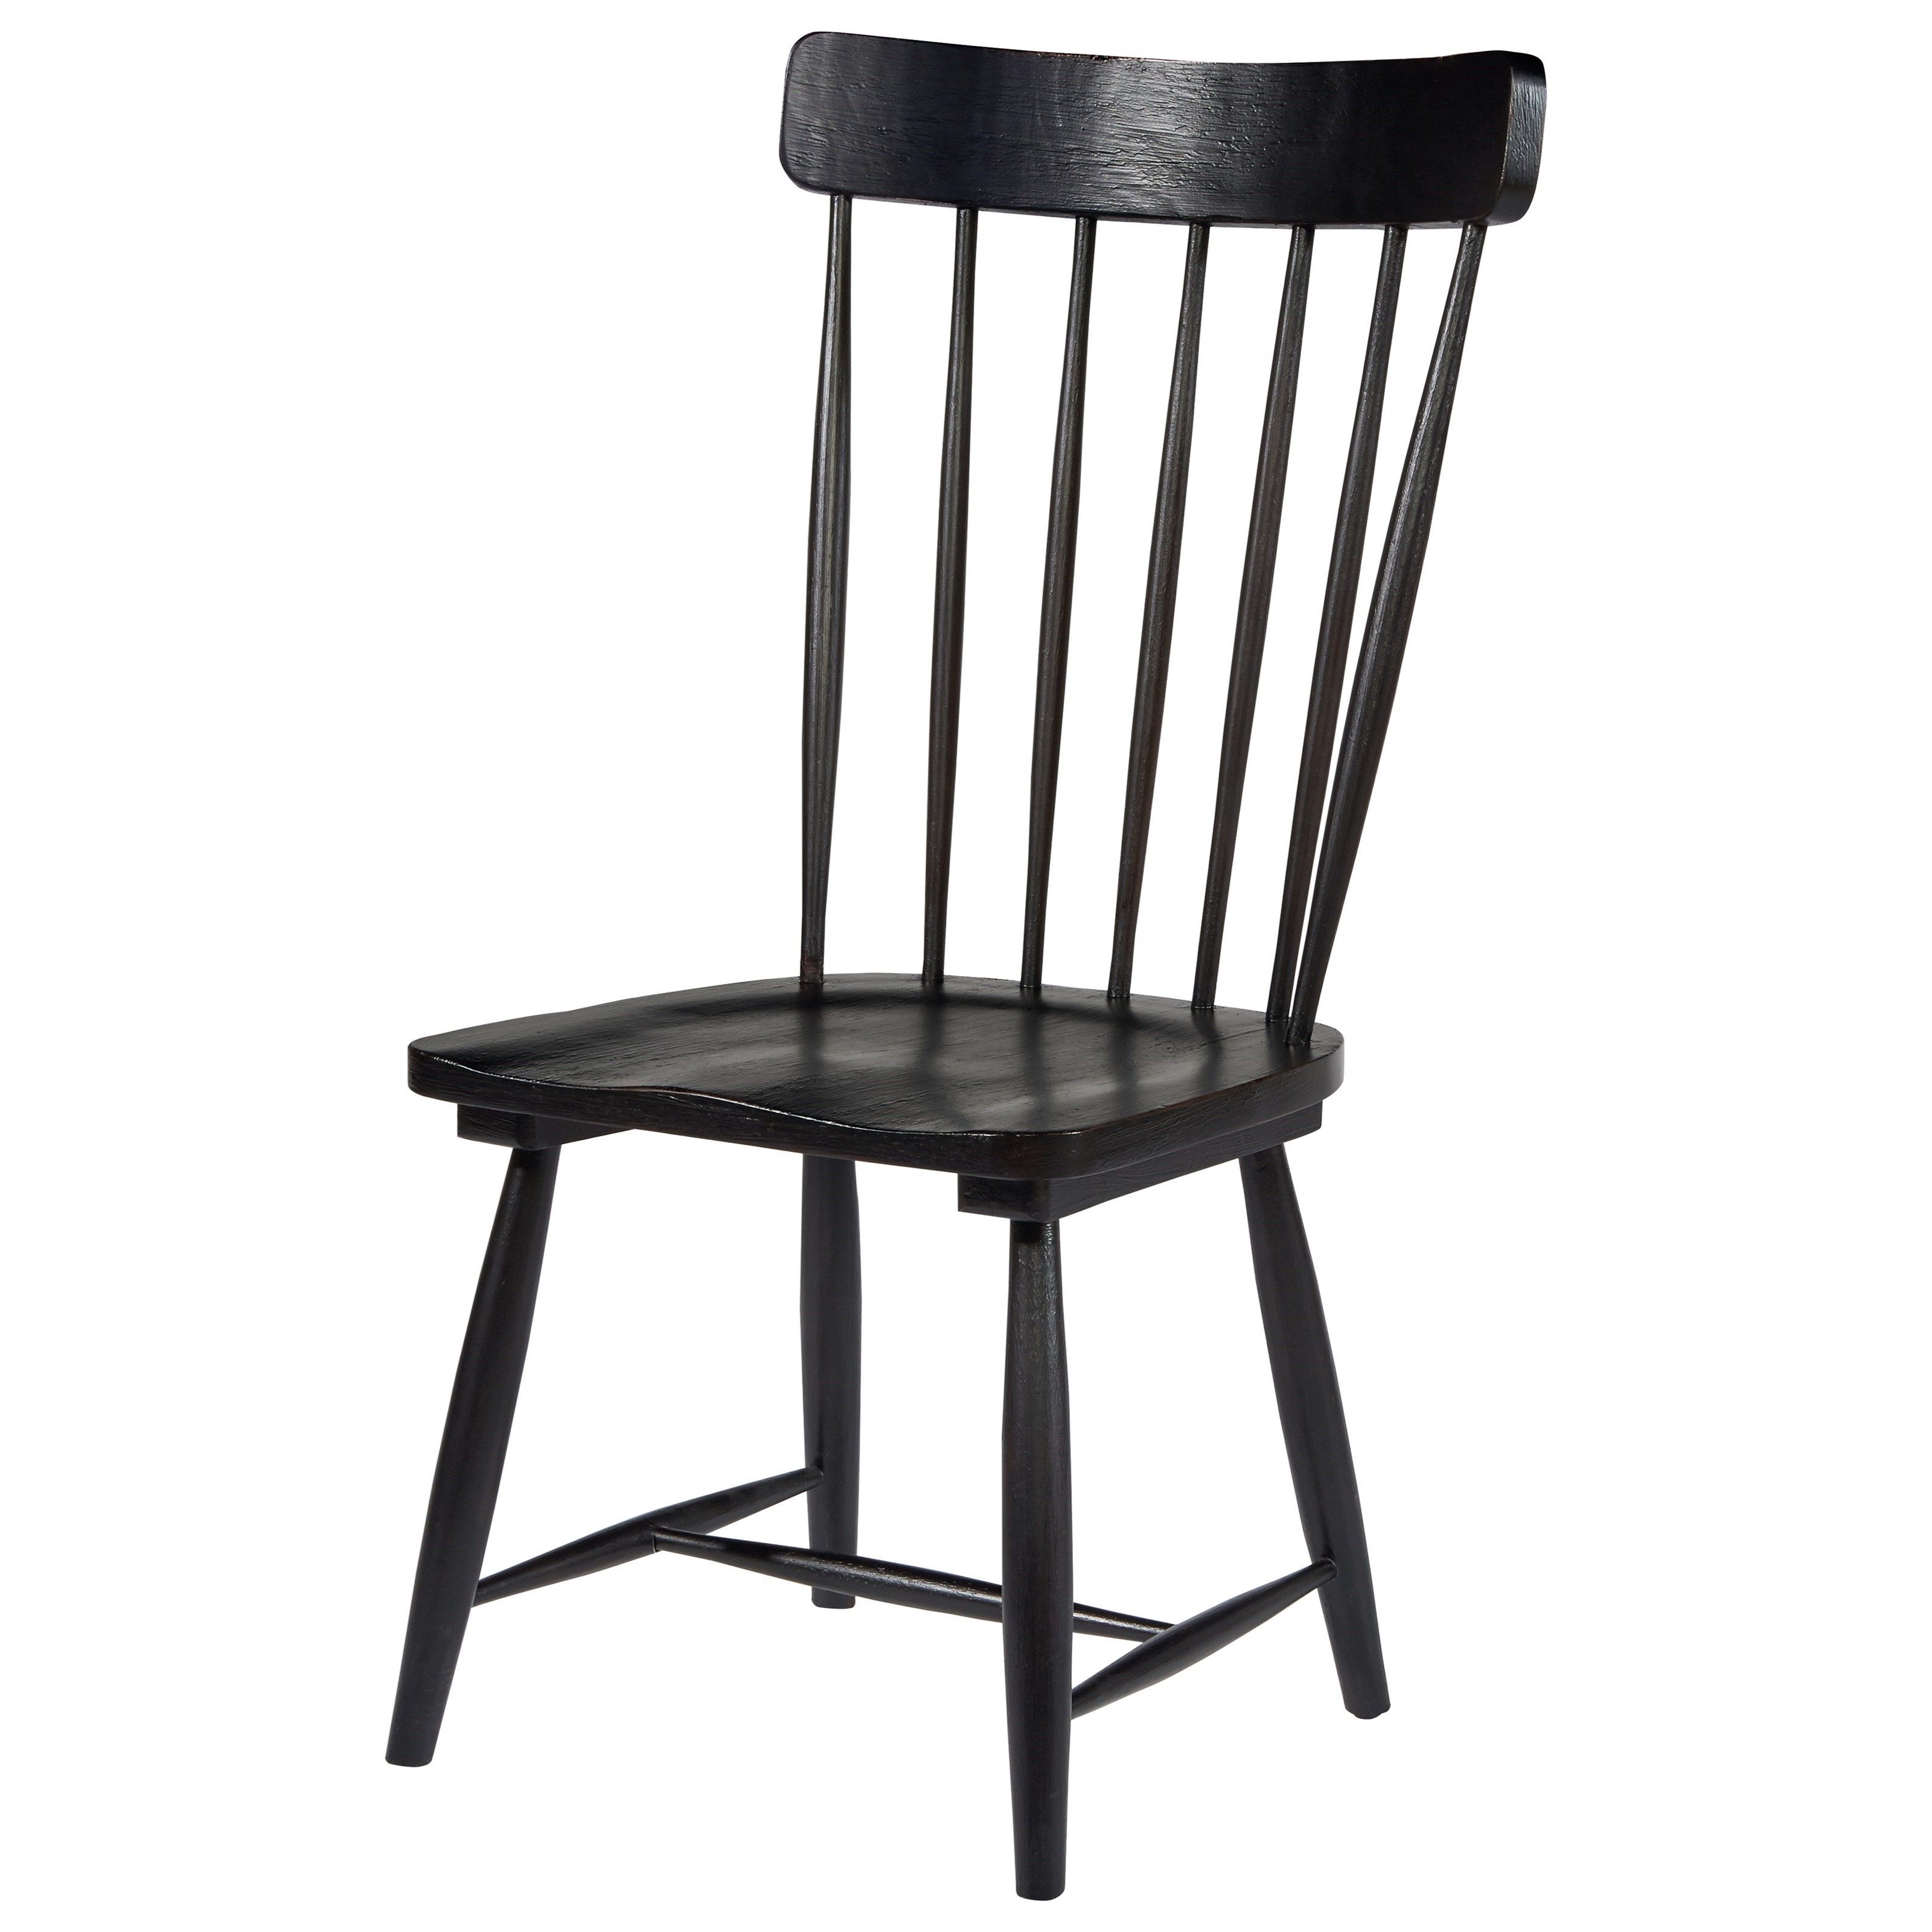 Magnolia Homejoanna Gaines Farmhouse Spindle Back Side Chair In Best And Newest Magnolia Home Spindle Back Side Chairs (View 2 of 20)